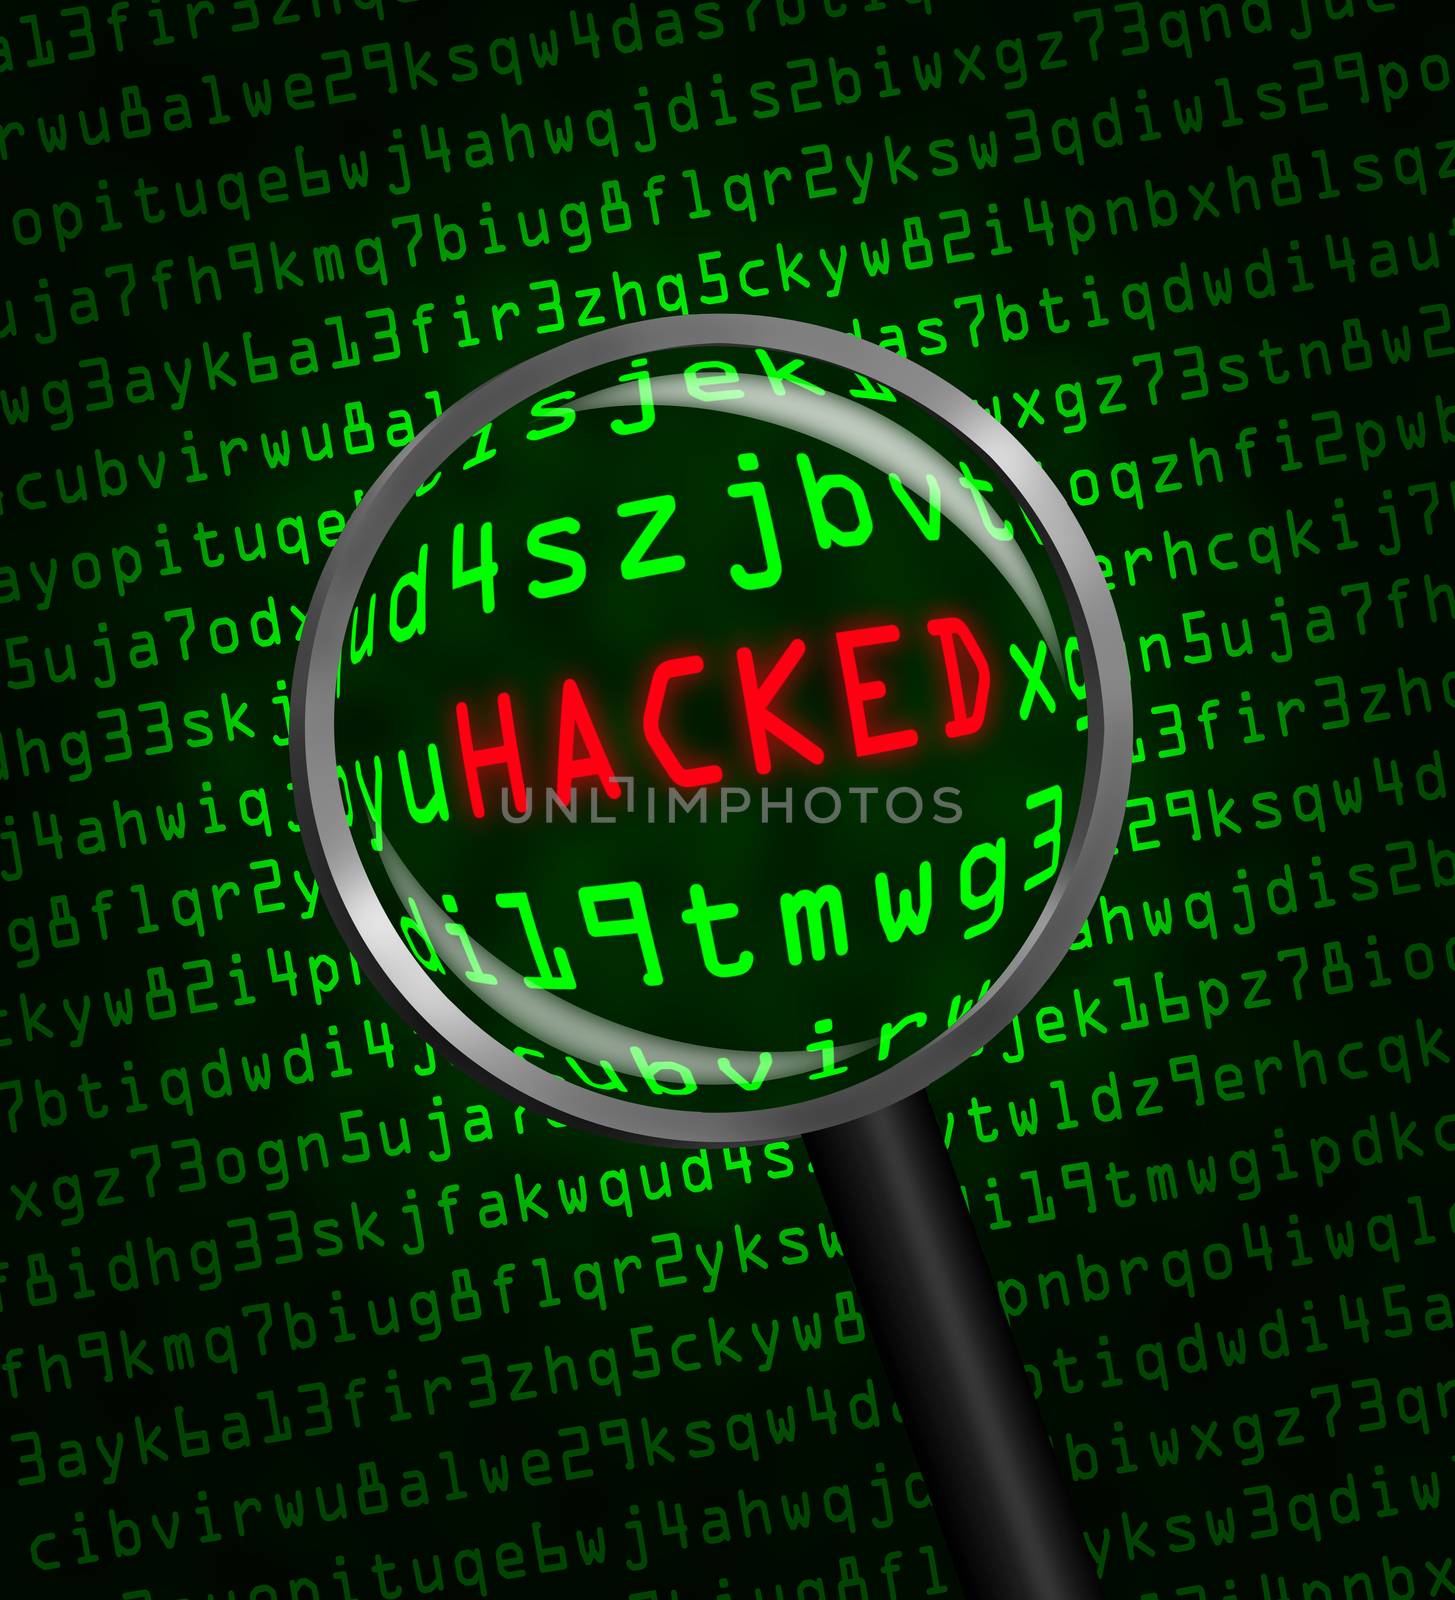 The red word "HACKED" revealed revealed in green computer machine code through a magnifying glass 